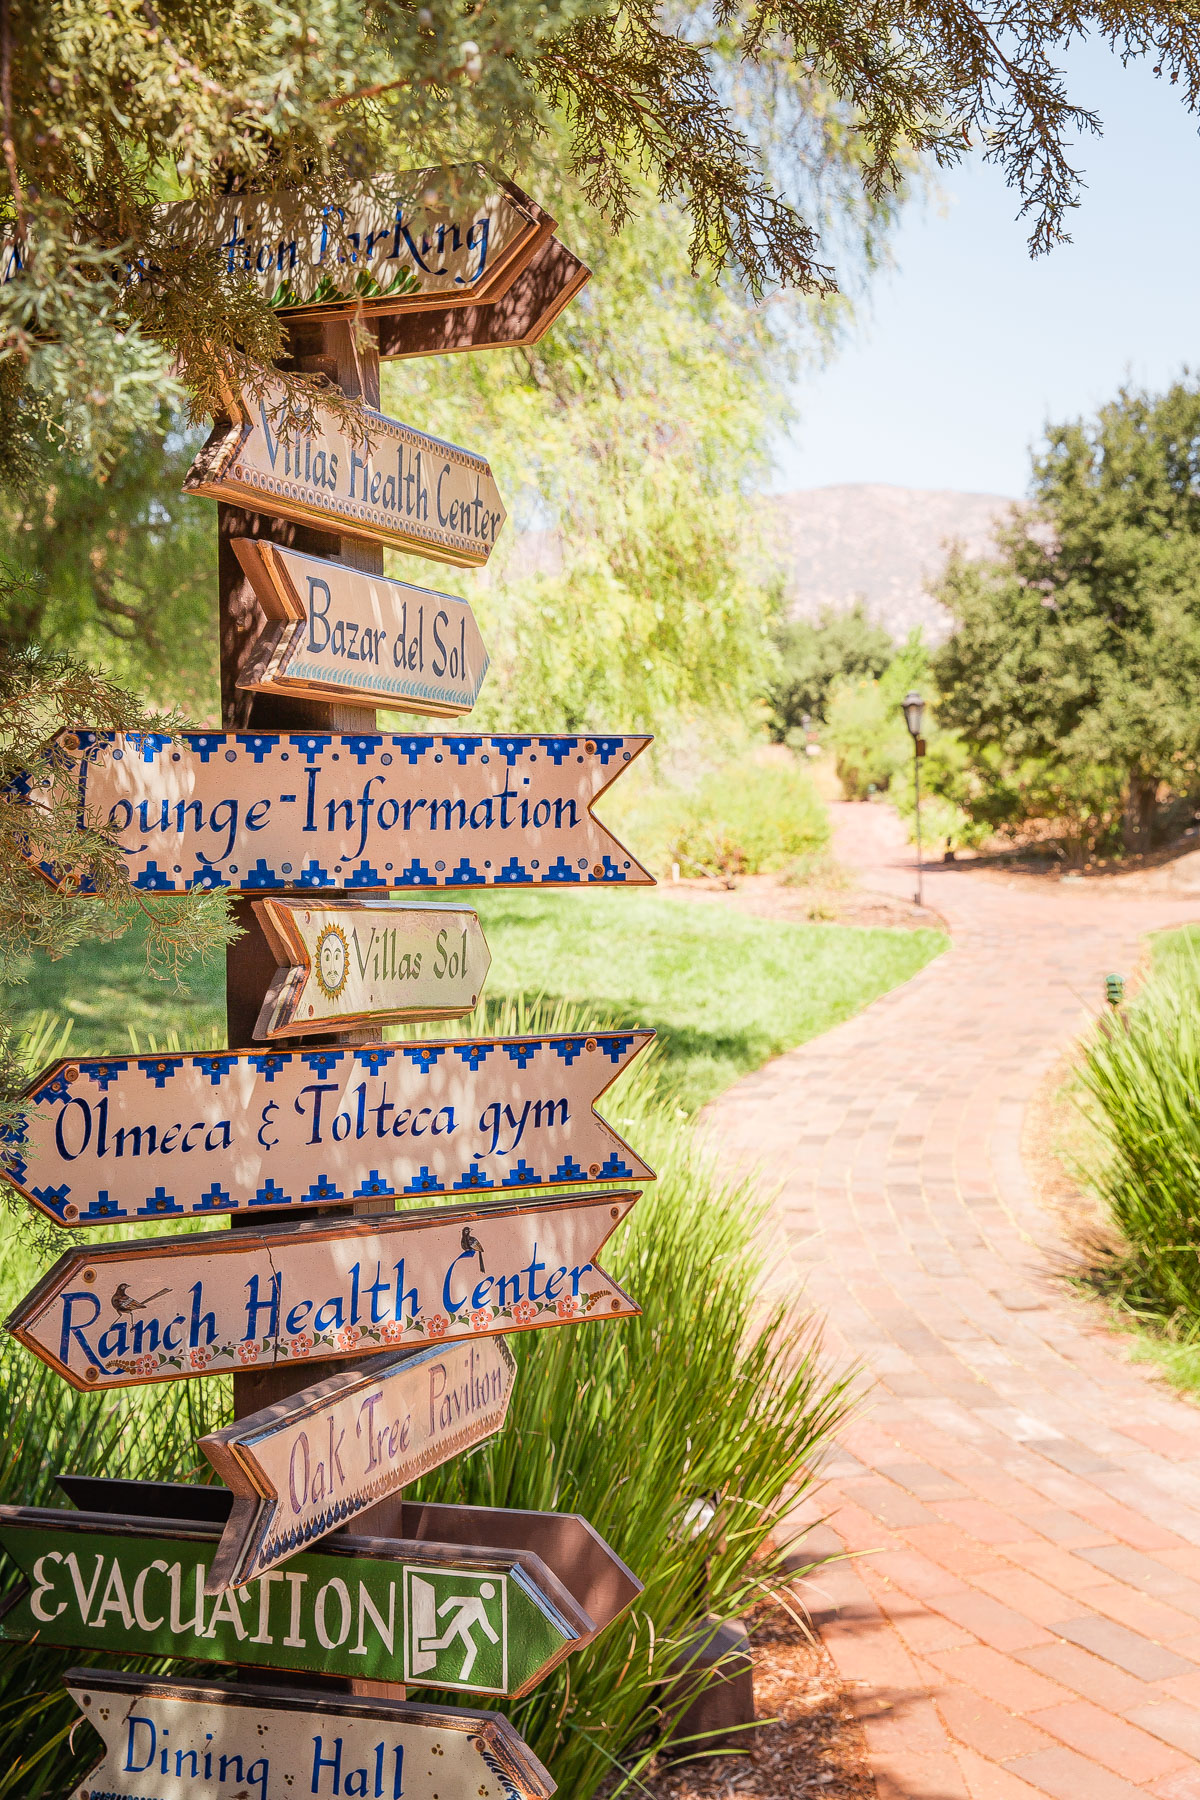 A Visit to Rancho La Puerta - and 5 Easy-to-Implement Wellness Tips + Takeaways! #travel #mexico #wellness #health